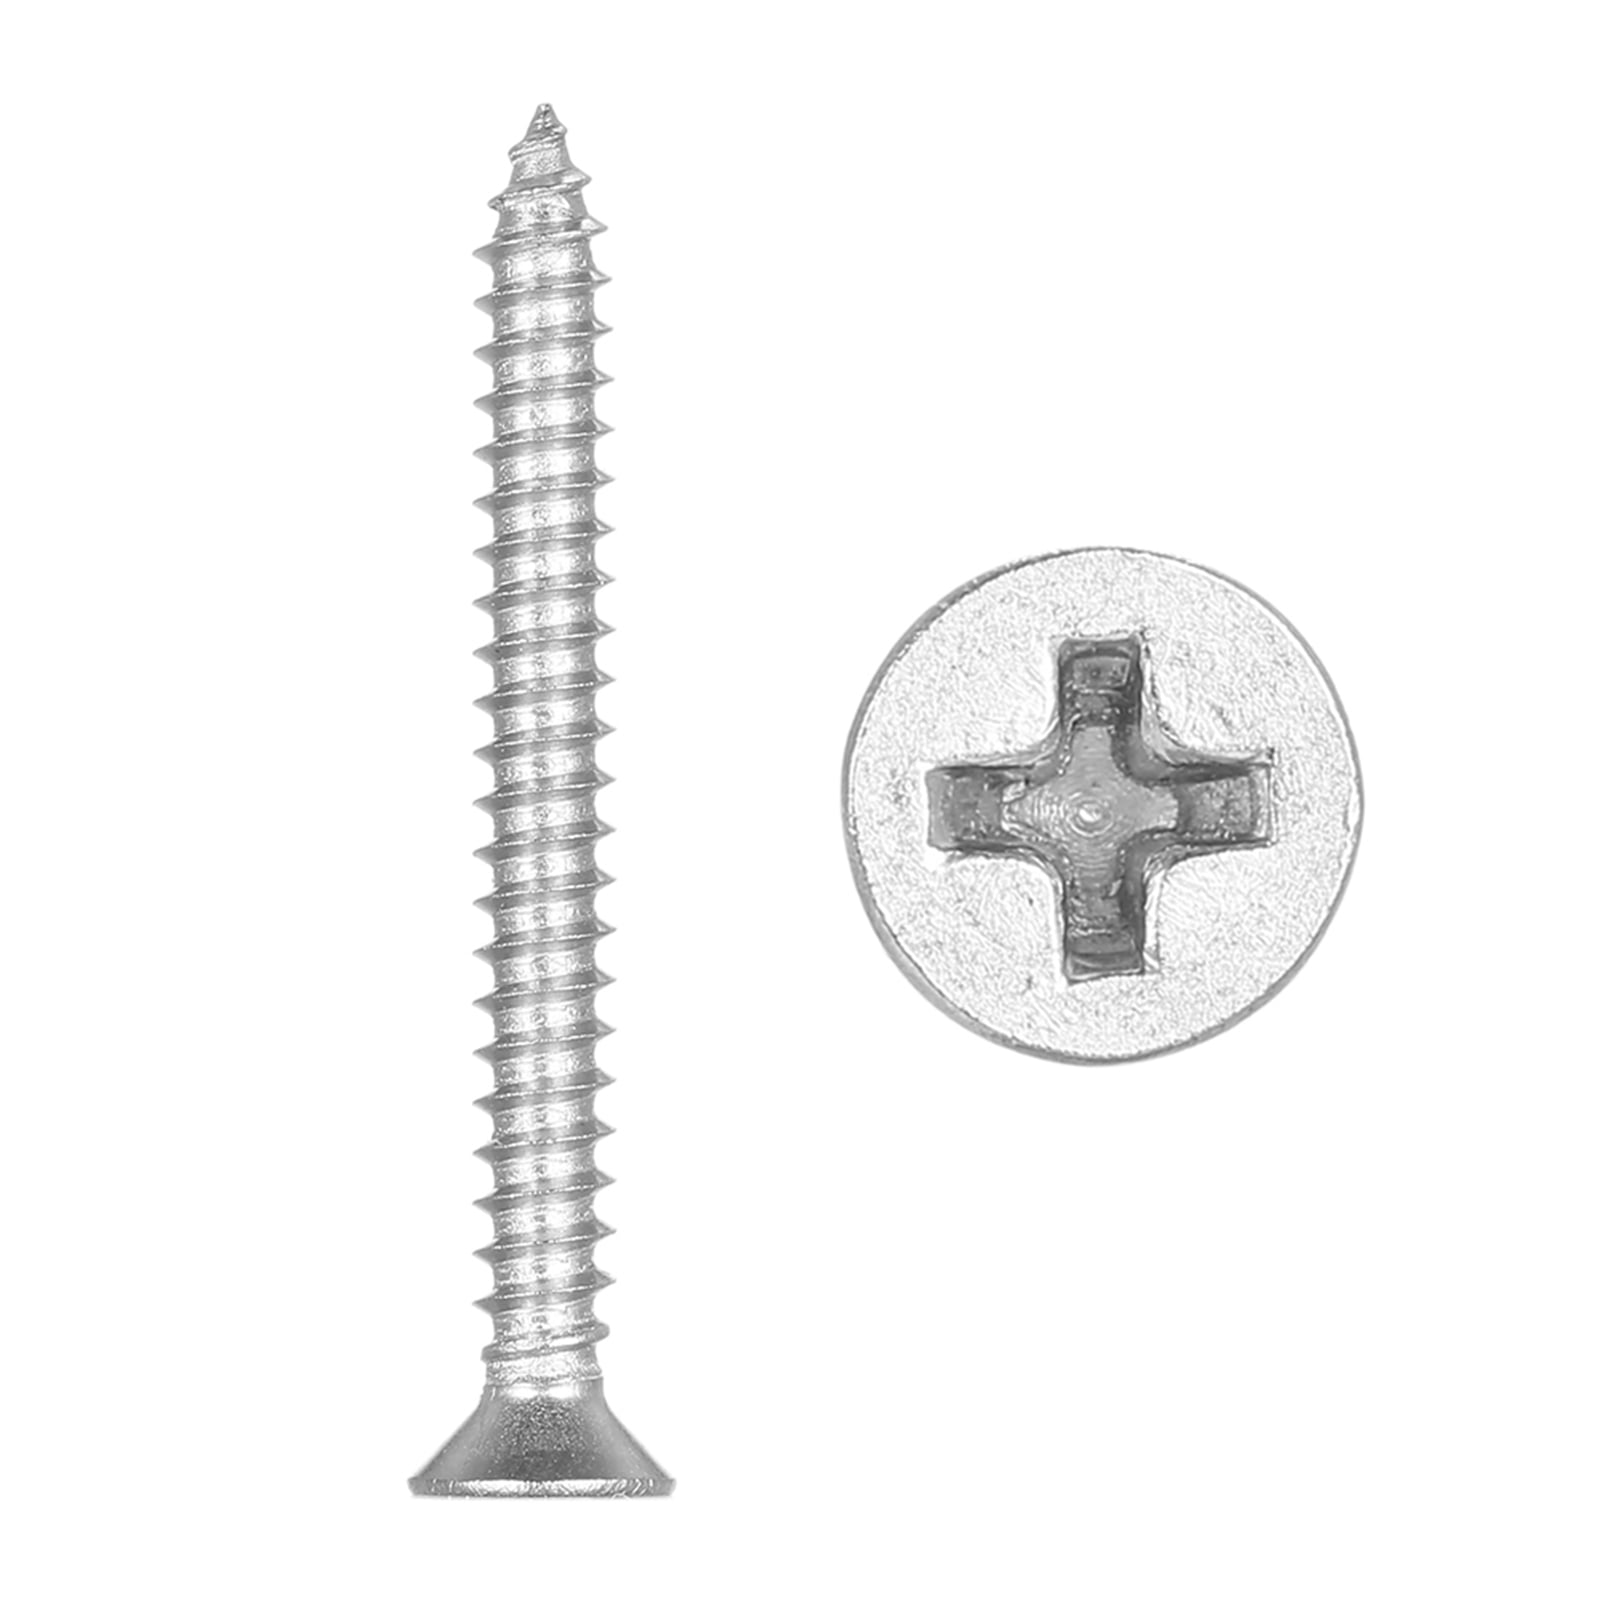 x50 8g x 1 1/2 4mm x 40mm Stainless COUNTERSUNK Self Tapping Screws 